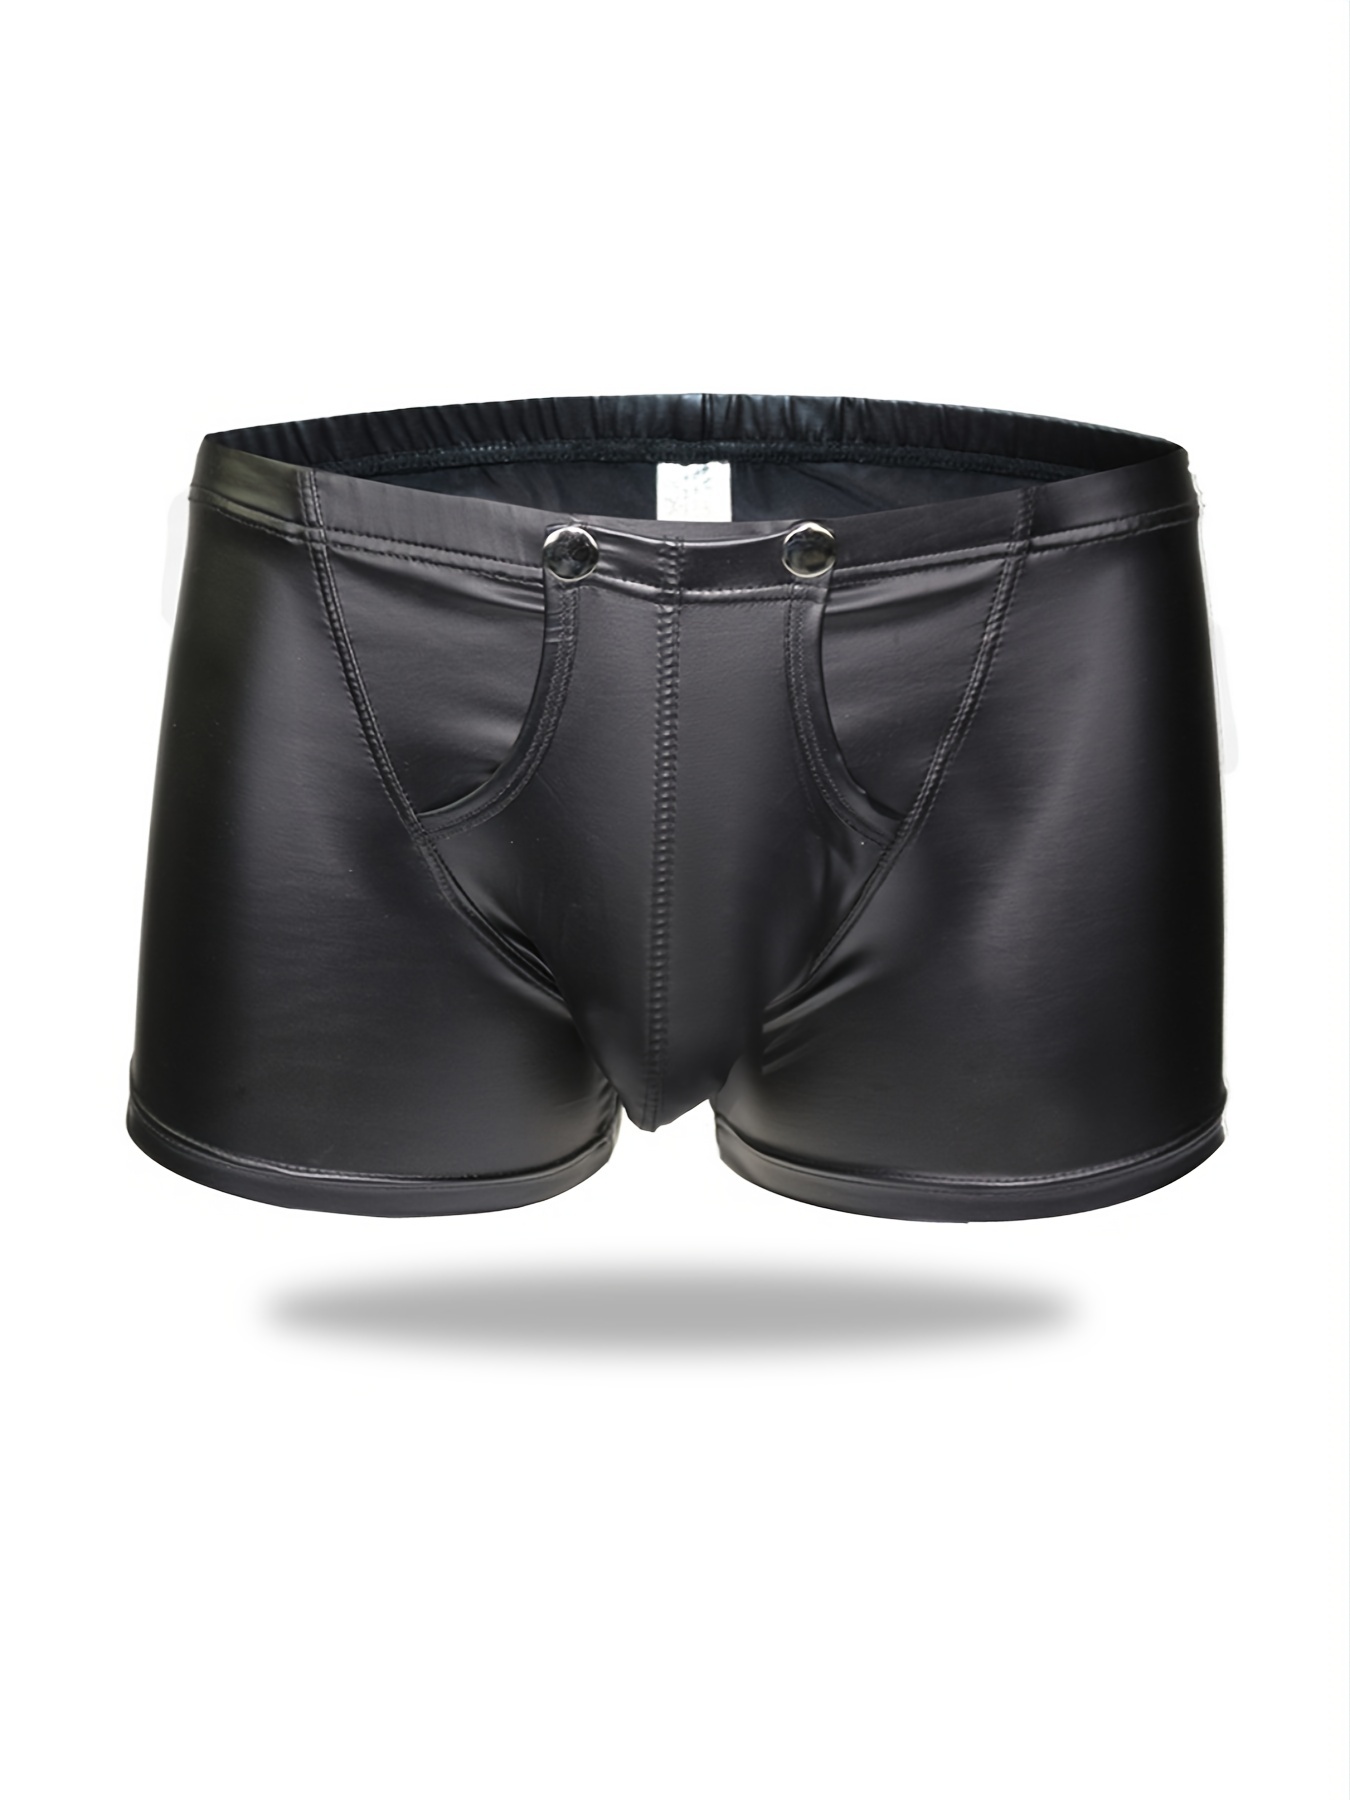 OROCOJUCO Men's Modal Ruched Back Briefs Underwear Male Posing String  Shorts Pouch Briefs